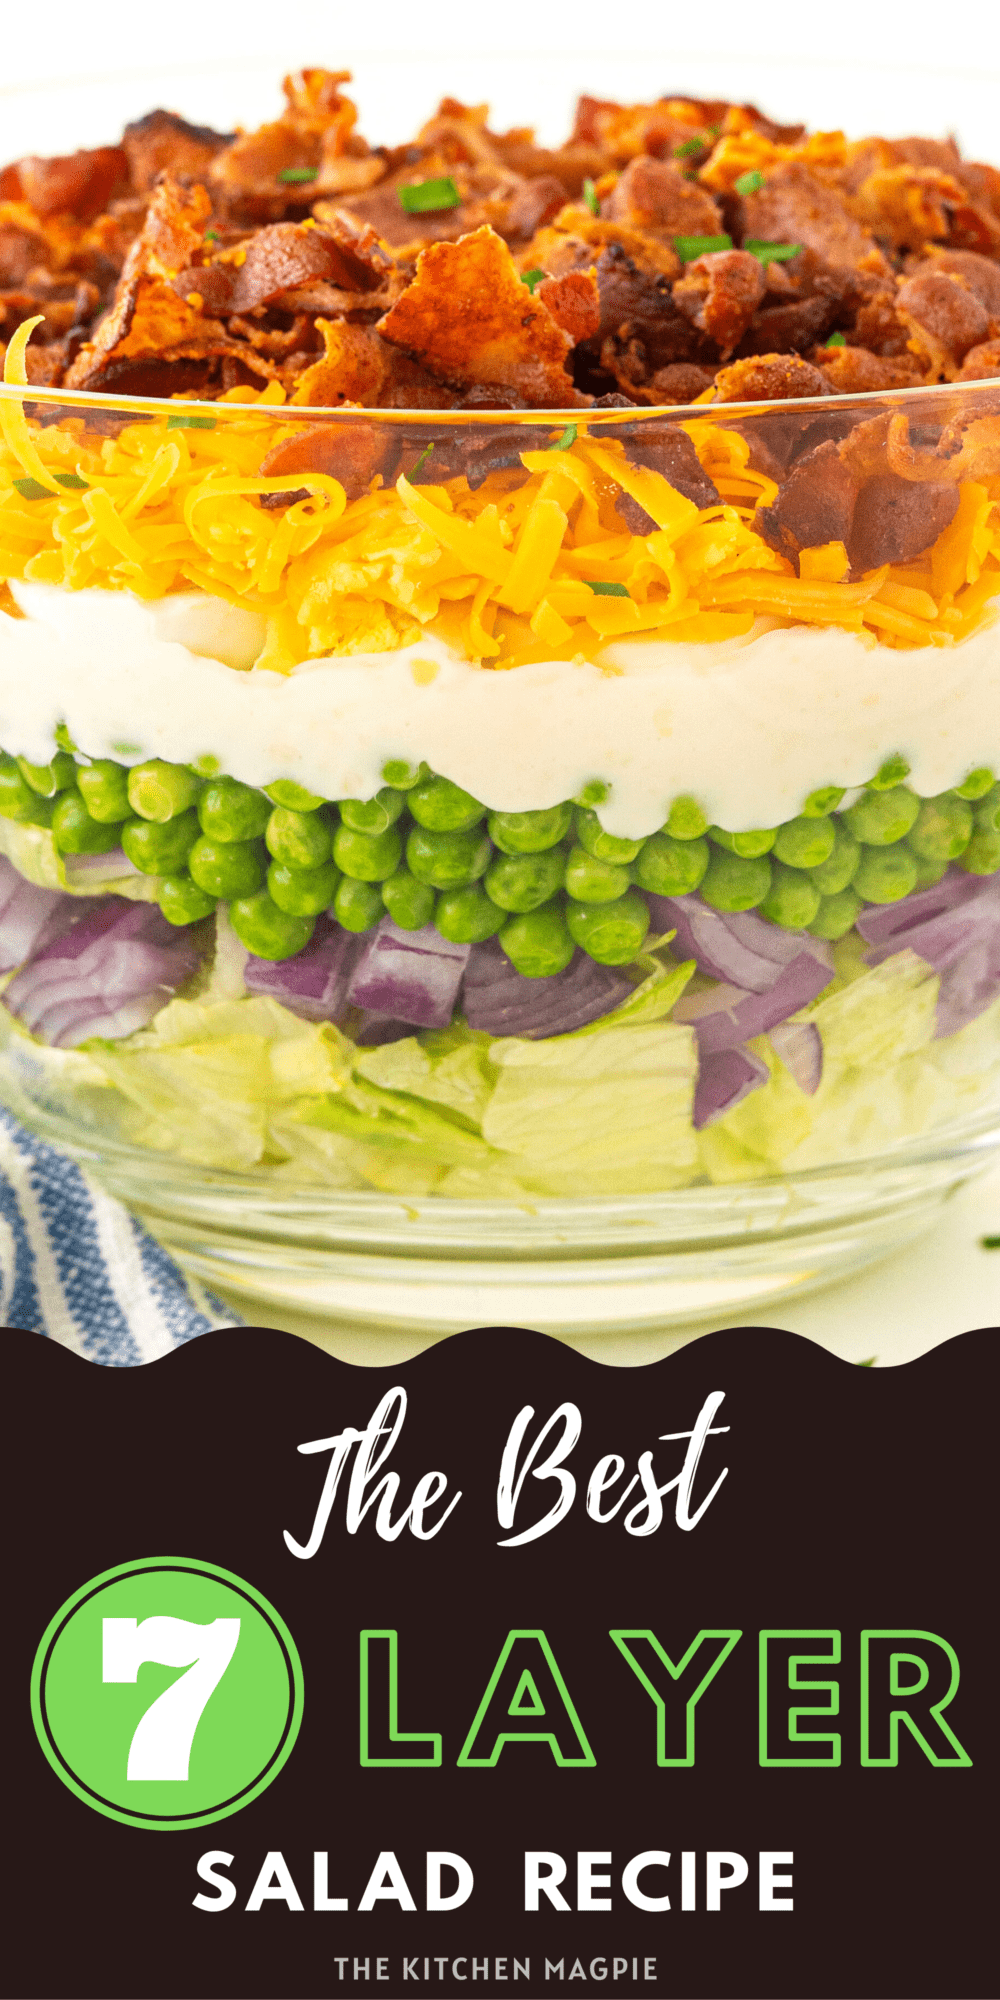 An absolutely delicious 7 layer salad recipe